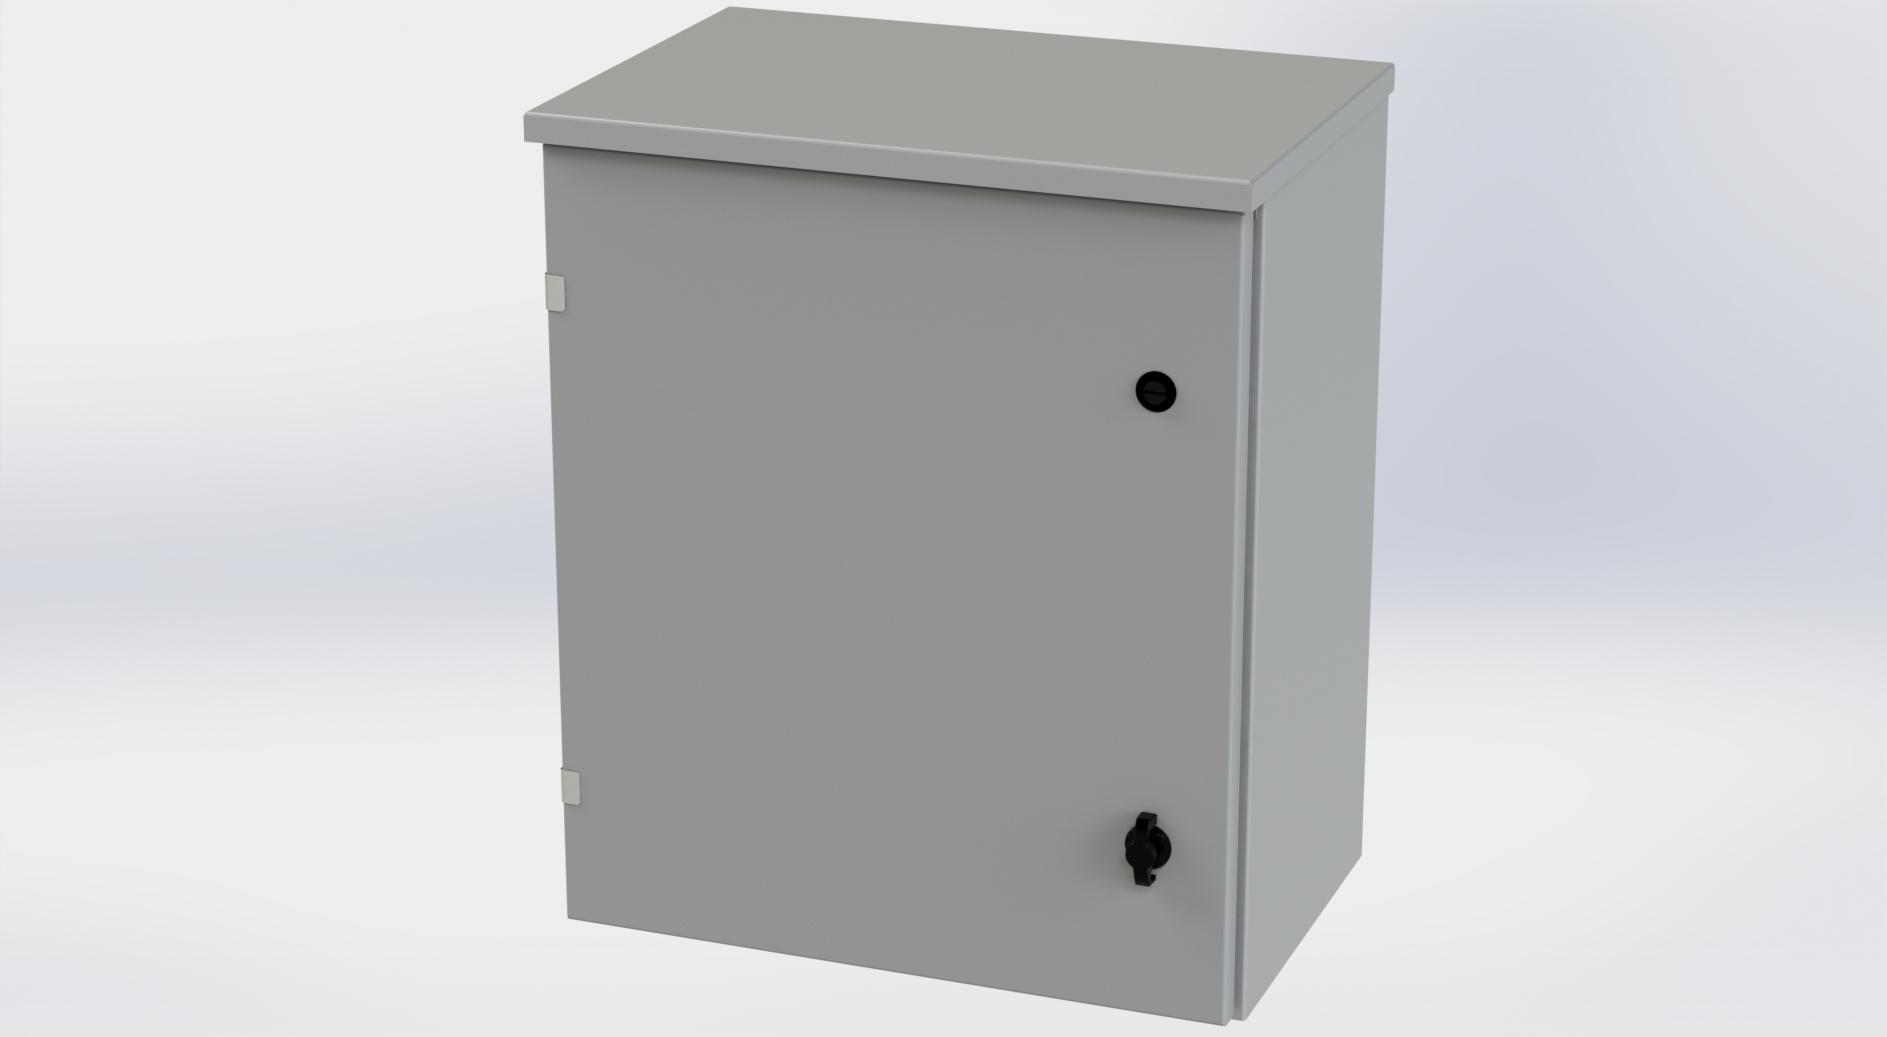 Saginaw Control SCE-24R2012LP Type-3R Hinged Cover Enclosure, Height:24.00", Width:20.00", Depth:12.00", ANSI-61 gray powder coating inside and out. Optional sub-panels are powder coated white.